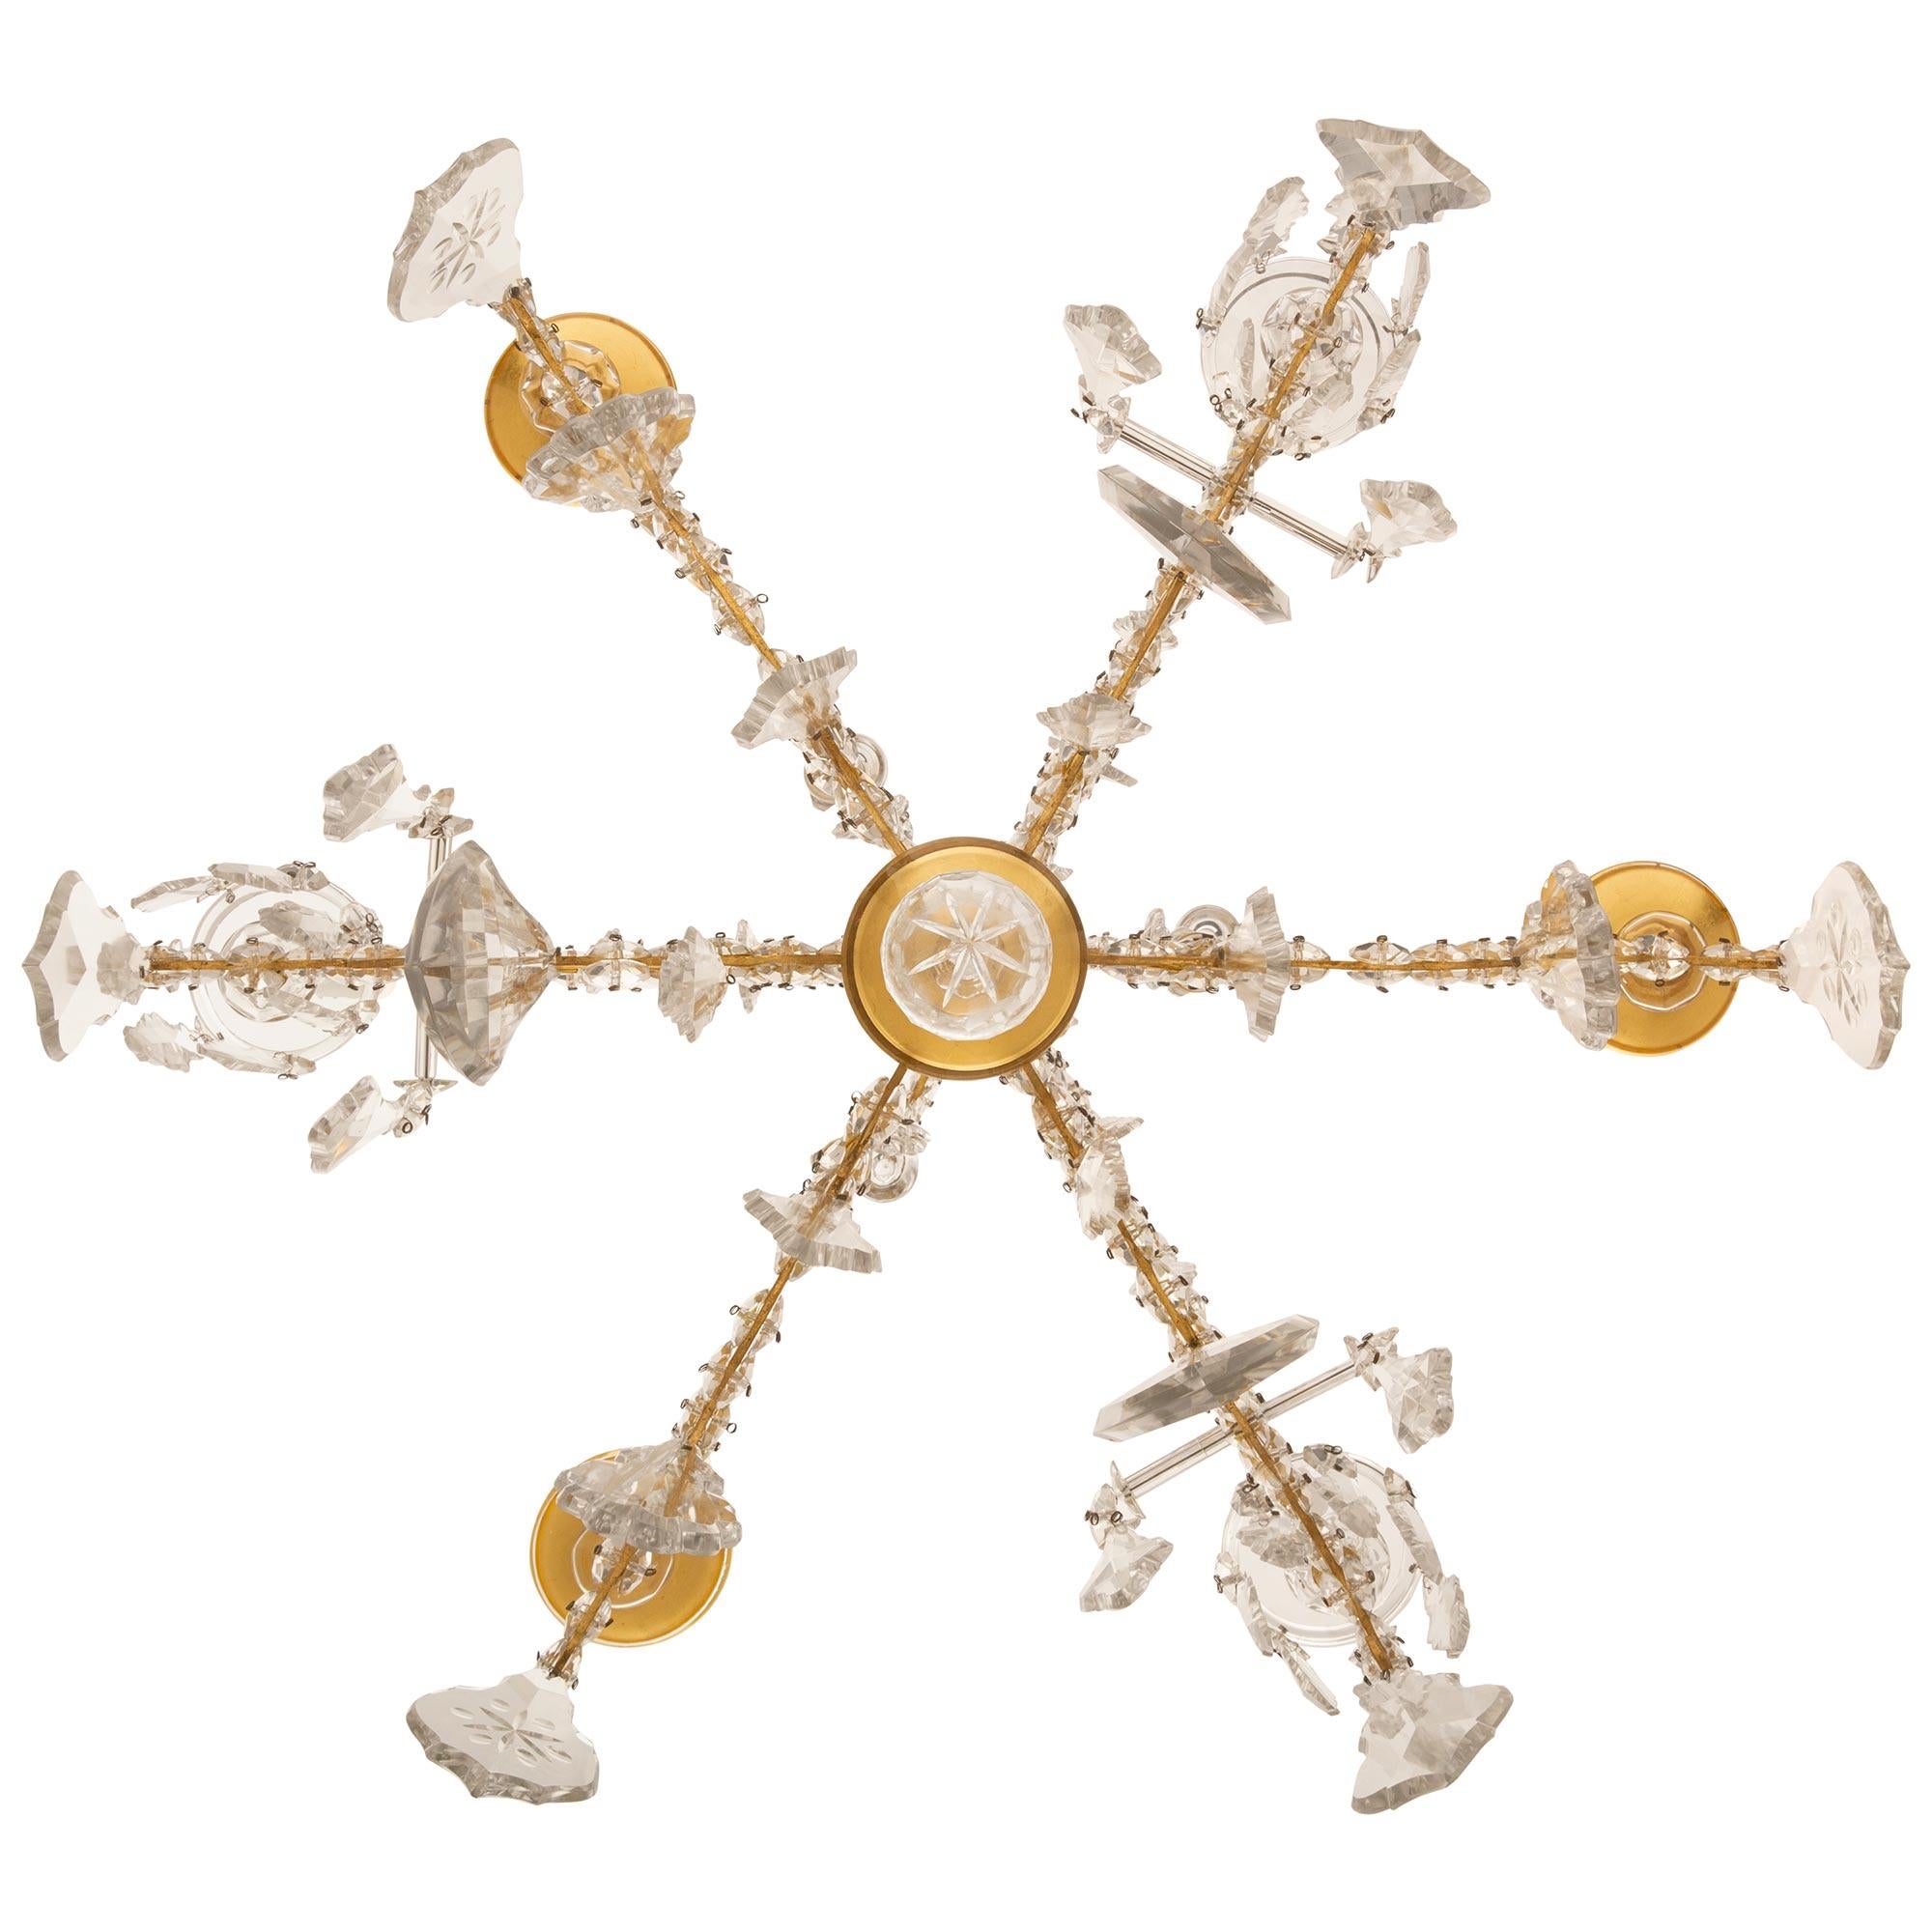 A wonderfully decorative and whimsical Italian 19th century Ormolu, Crystal and Gilt Crystal chandelier. The six arm chandelier has a central gilt dome bottom with a hanging cut crystal ball. Above are six scrolled Ormolu arms which are decorated on